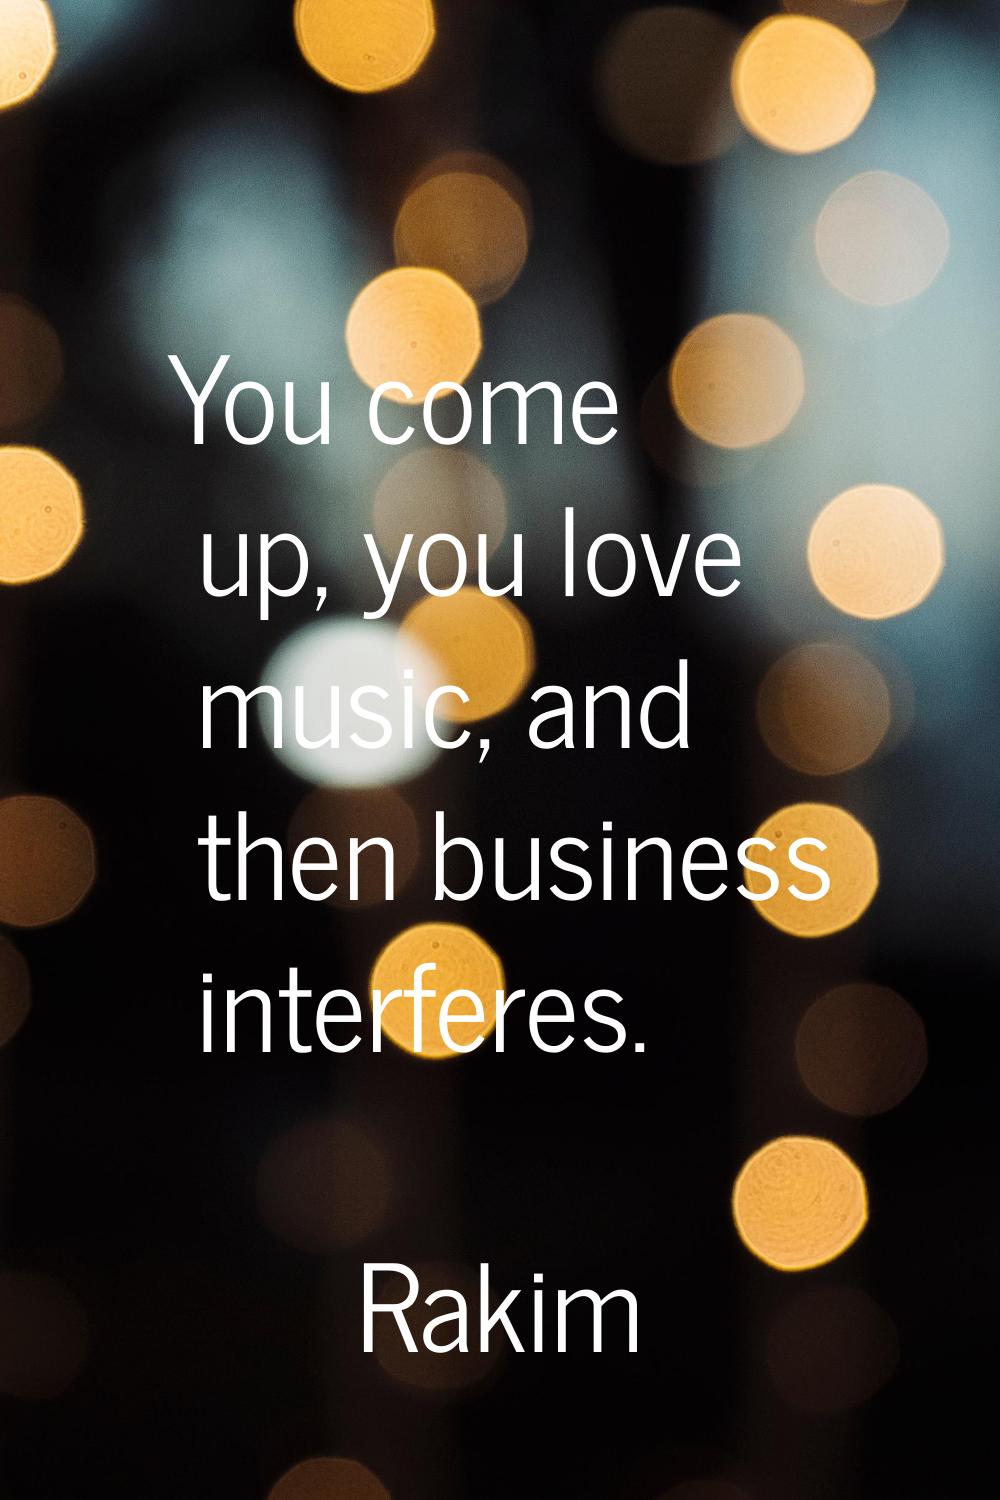 You come up, you love music, and then business interferes.